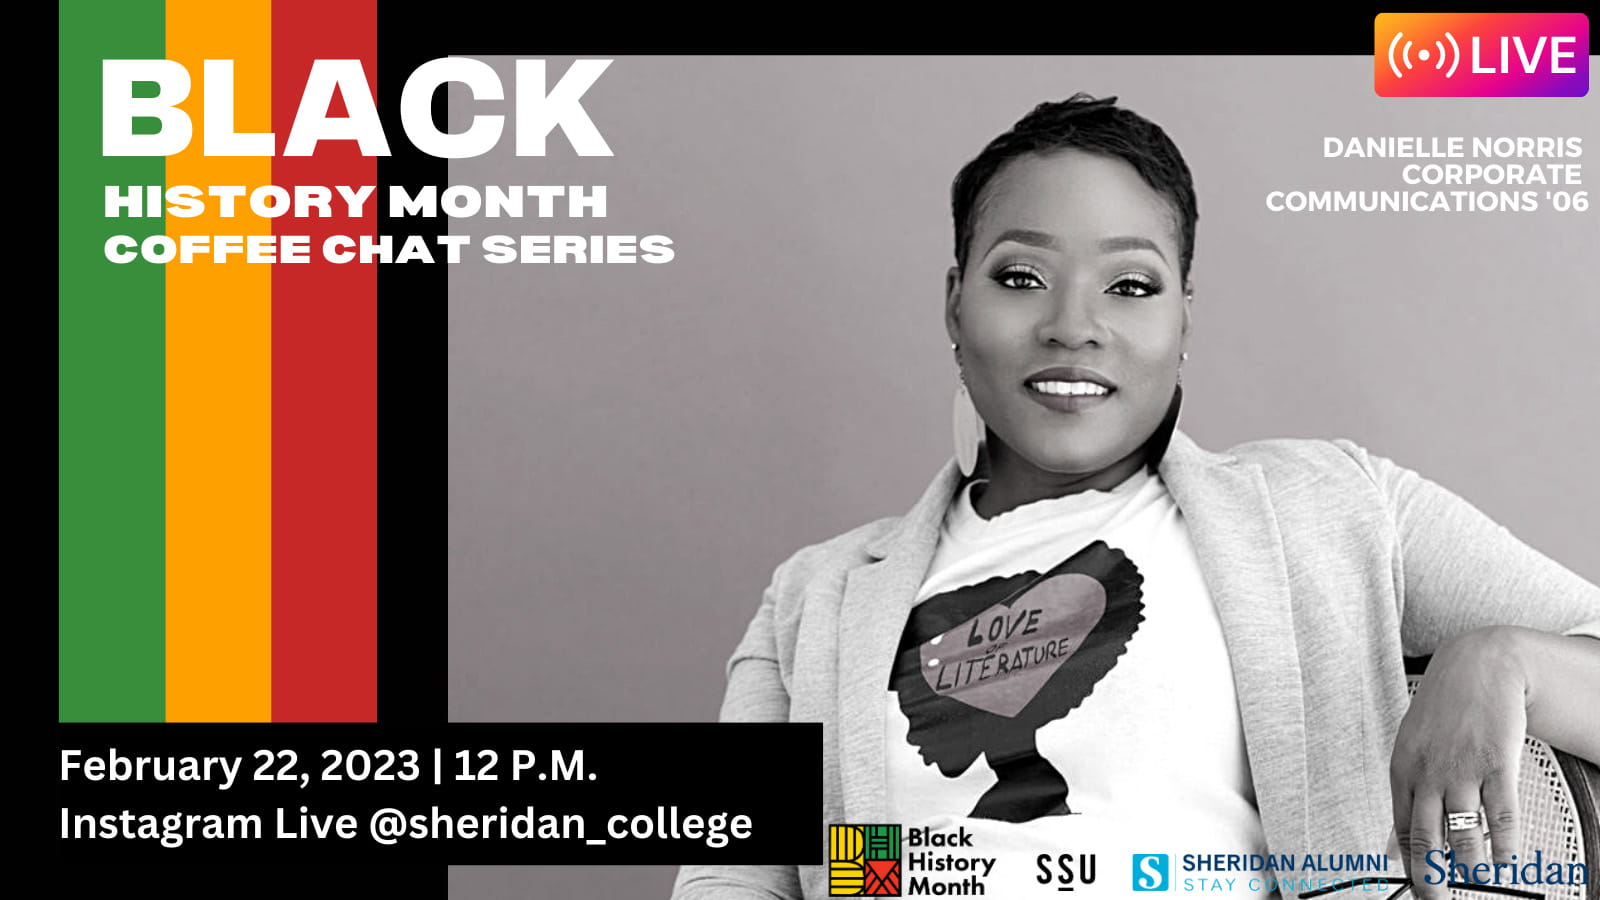 Black History Month Coffee Chat Series | Danielle Norris | Corporate Communications ’06 | February 22, 2023 | 12 P.M. | Instagram Live @sheridan_college